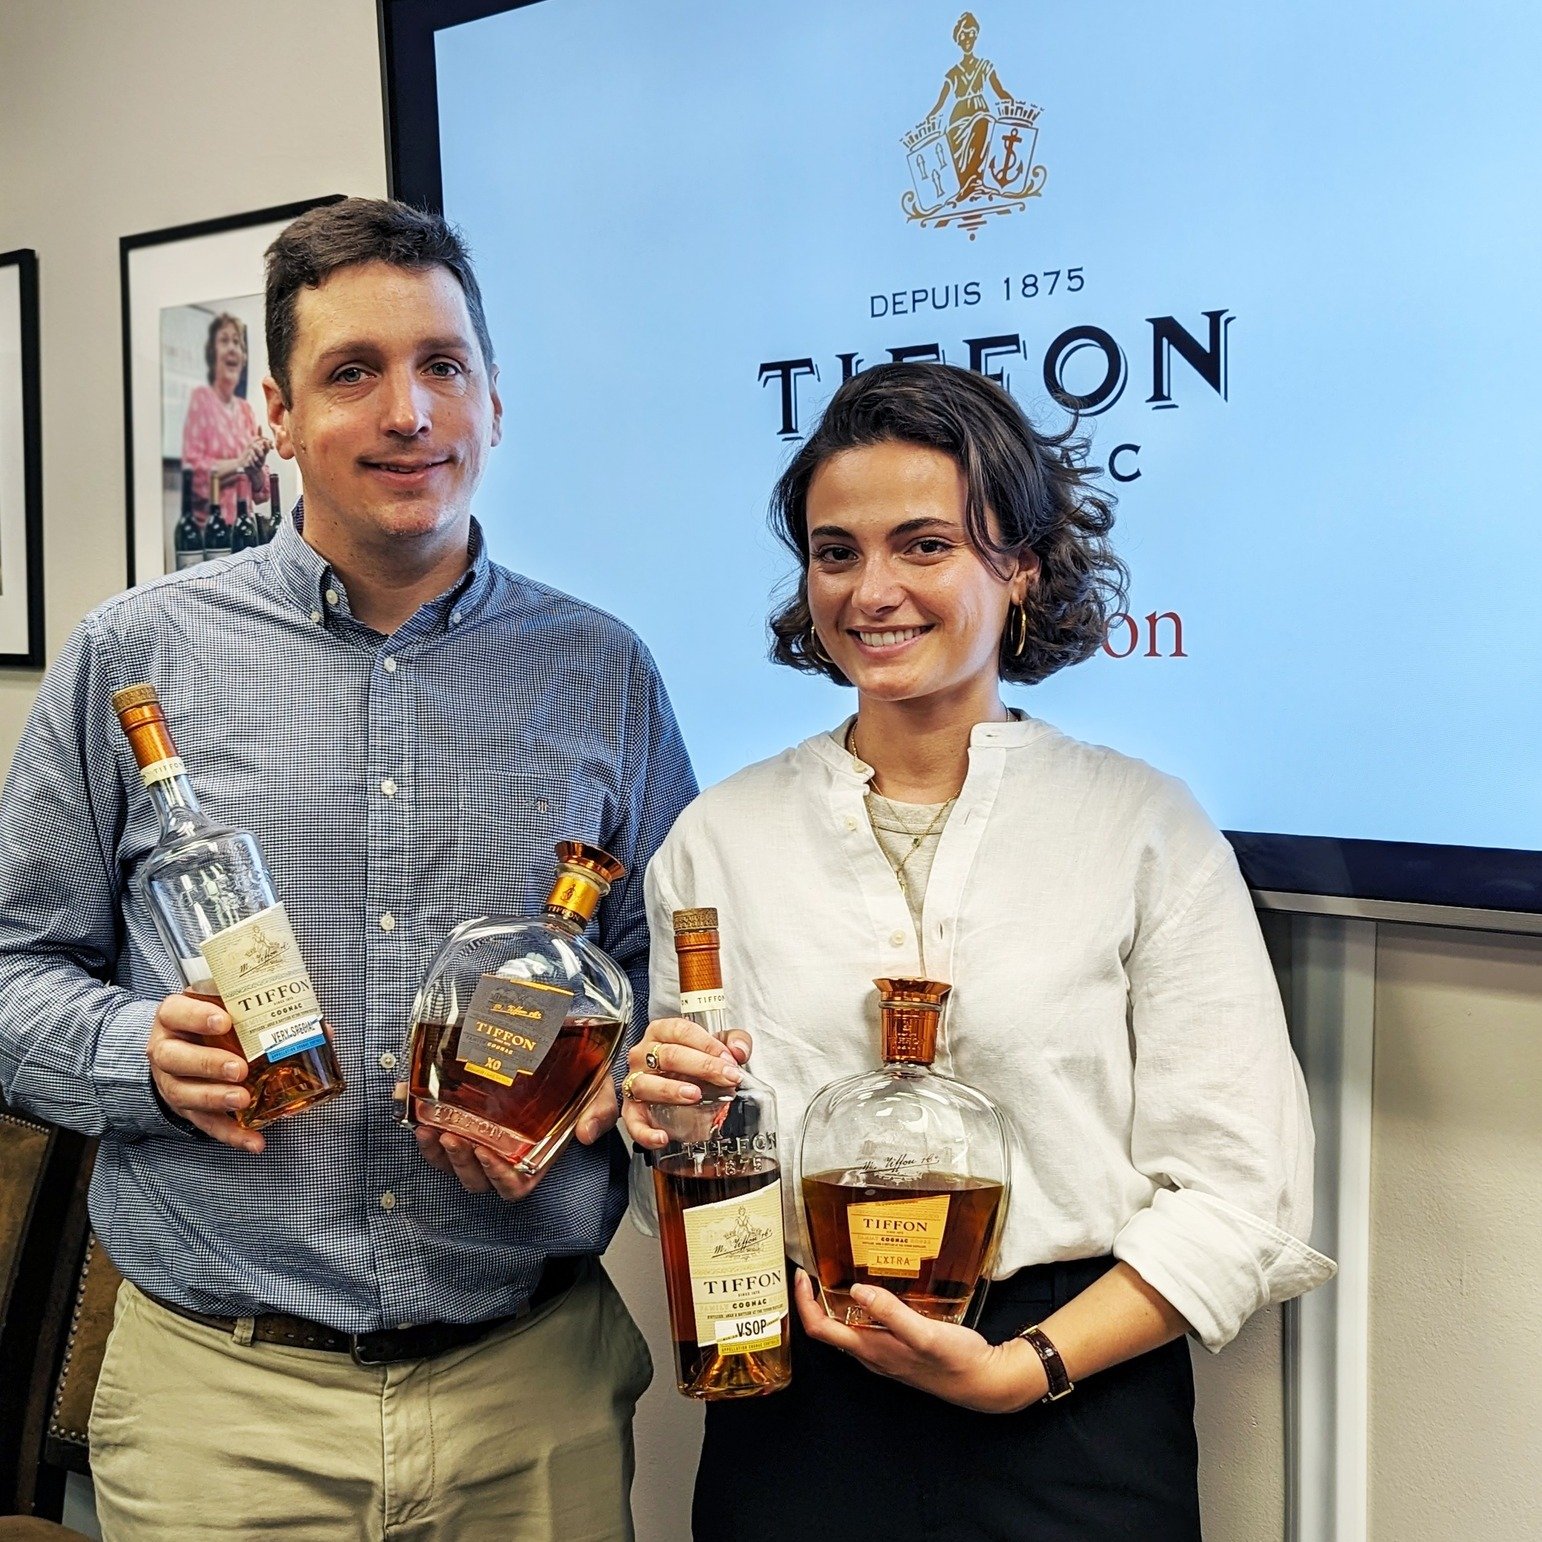 MISA Imports held a fantastic Tiffon Cognac tasting and training with our guests Laura Anne Scomparin and Edouard Braastad, the Sales and Marketing Director for Tiffon Cognac. 

Tiffon Cognac has been family owned since 1875. The signature of Tiffon&